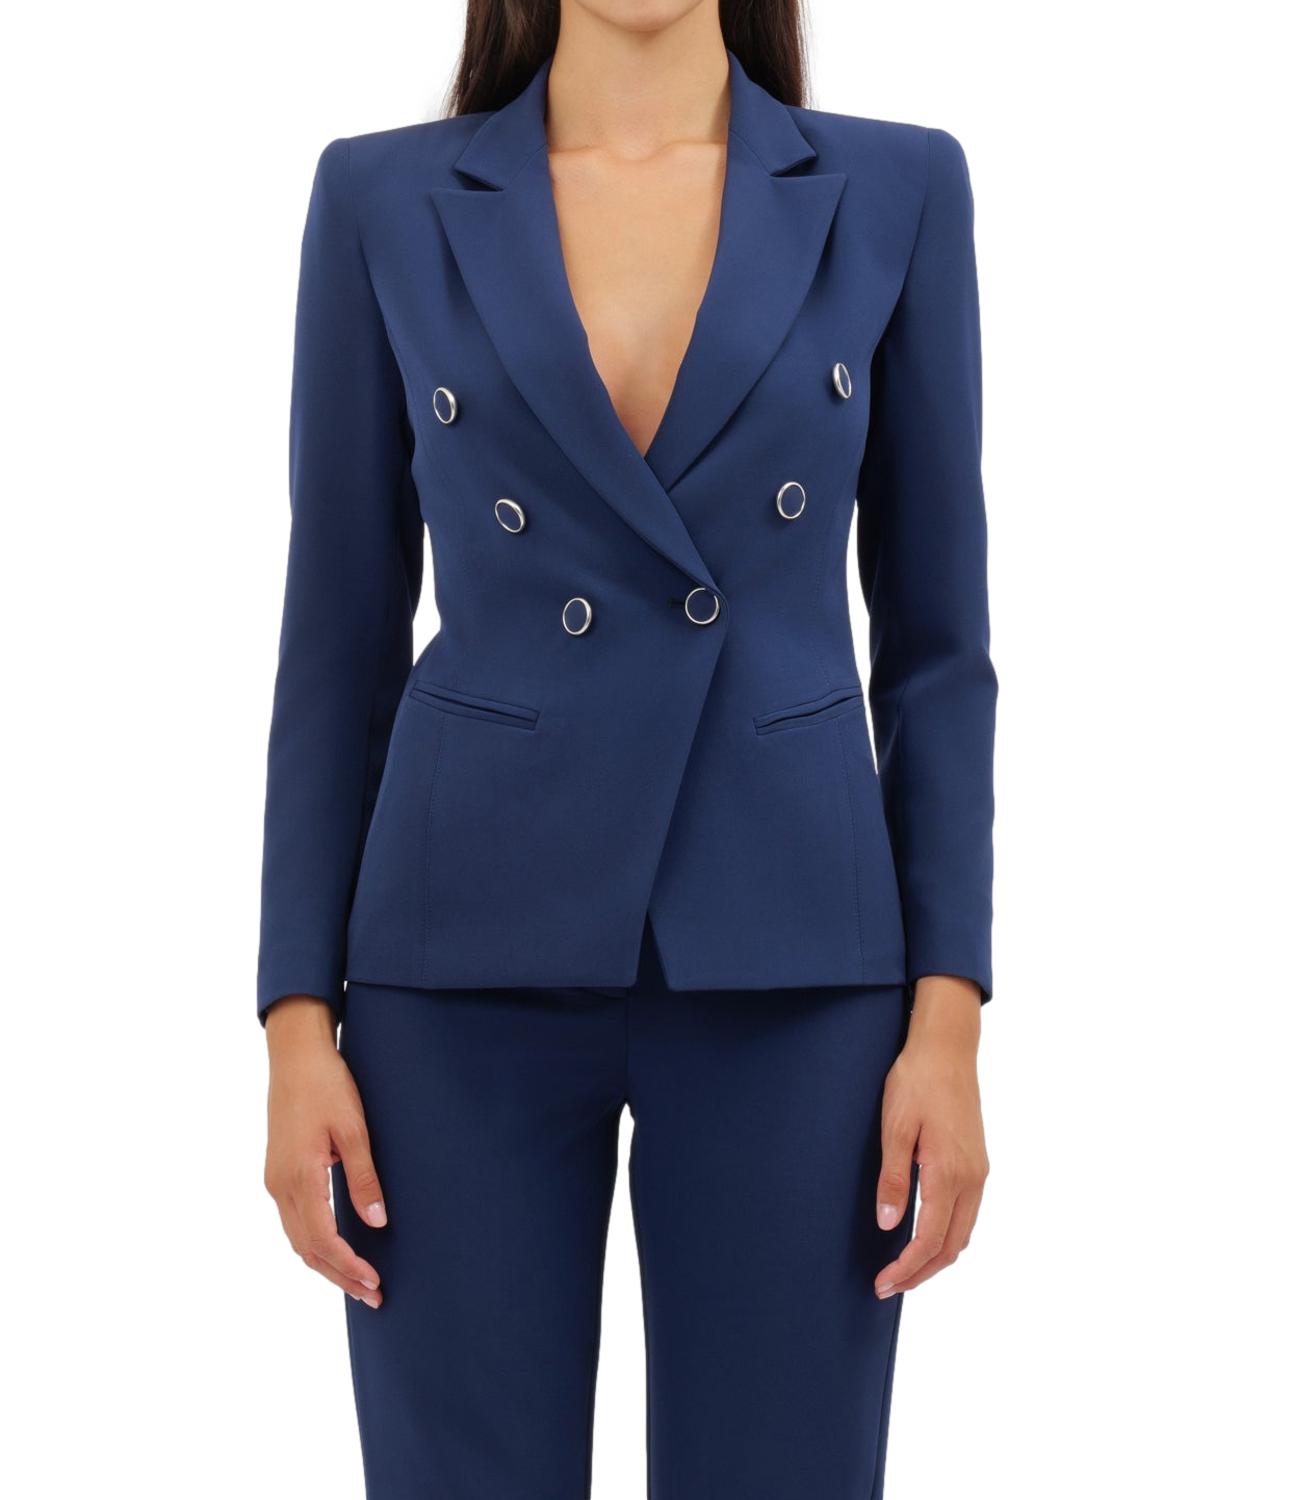 SILENCE LIMITED Giacca Cassiopea blu navy Donna